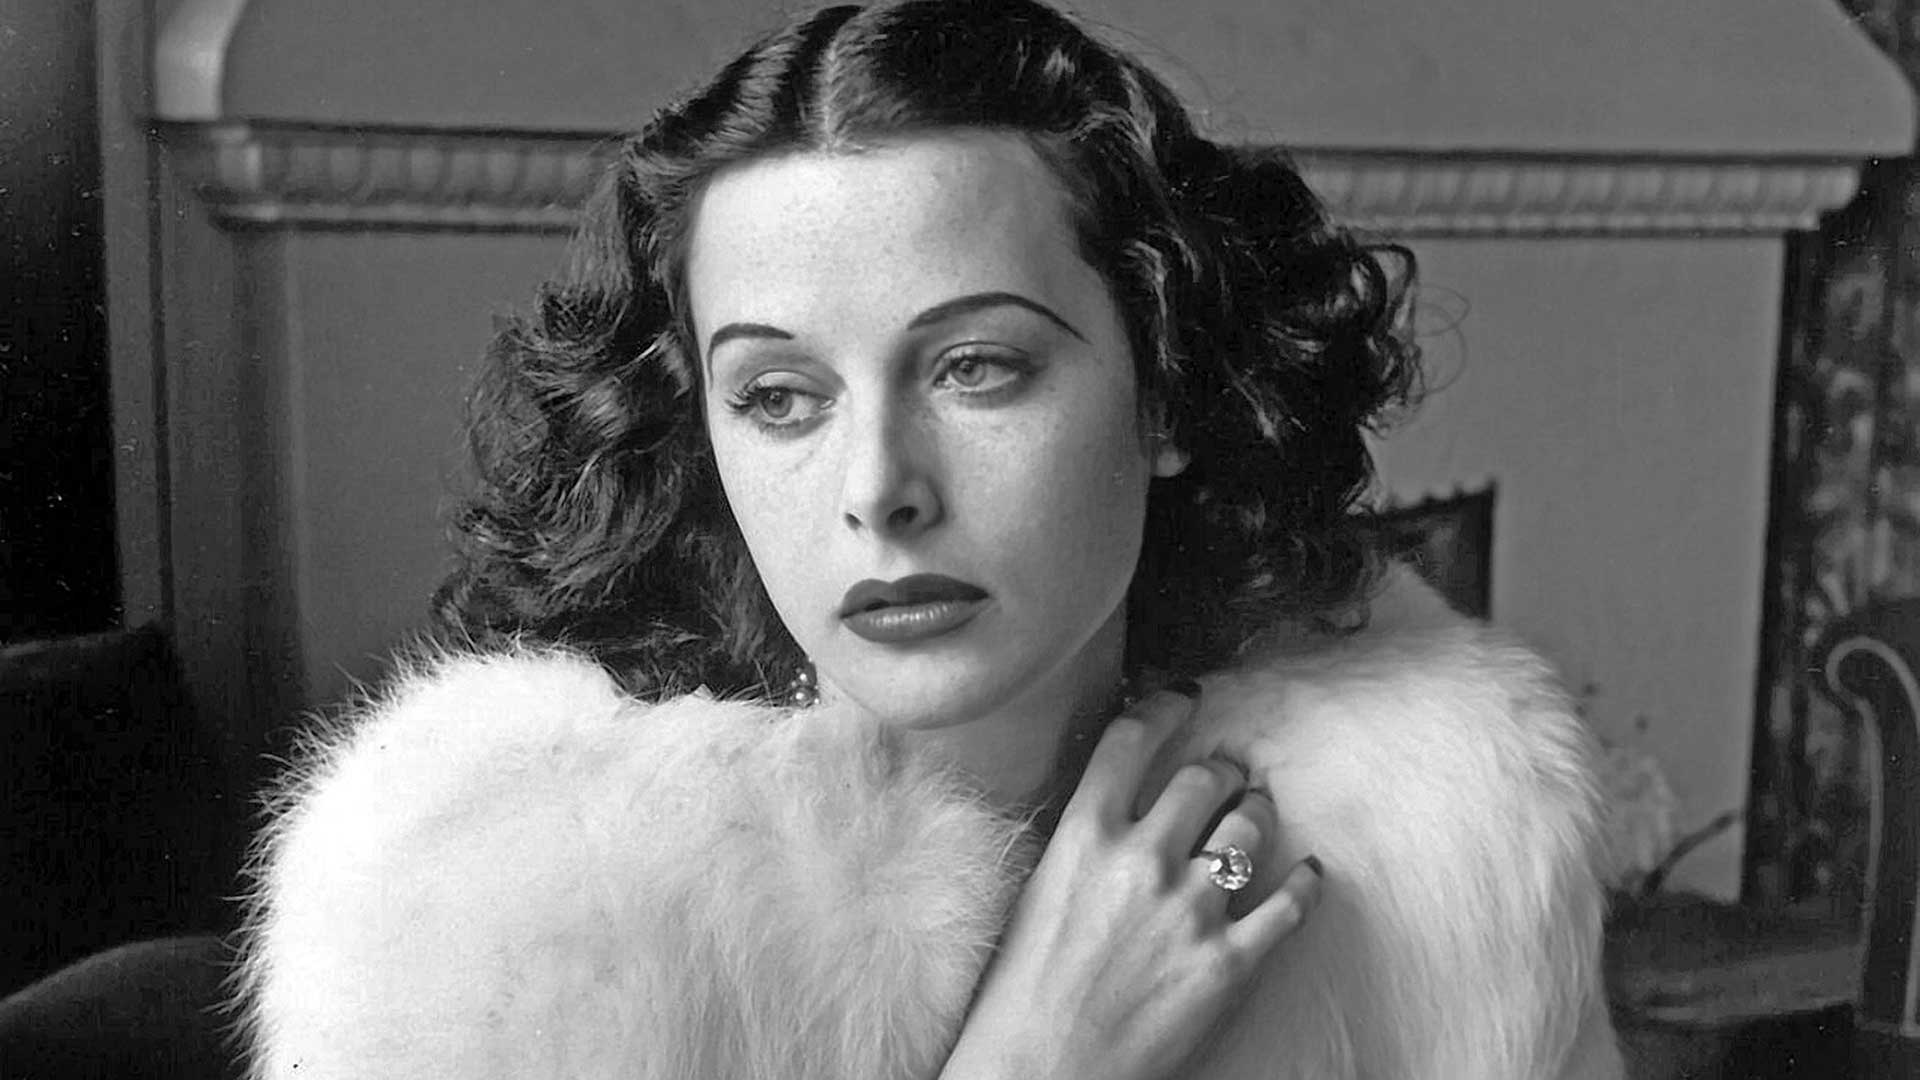 Bombshell: The Hedy Lamarr Story. About Hedy Lamarr Documentary